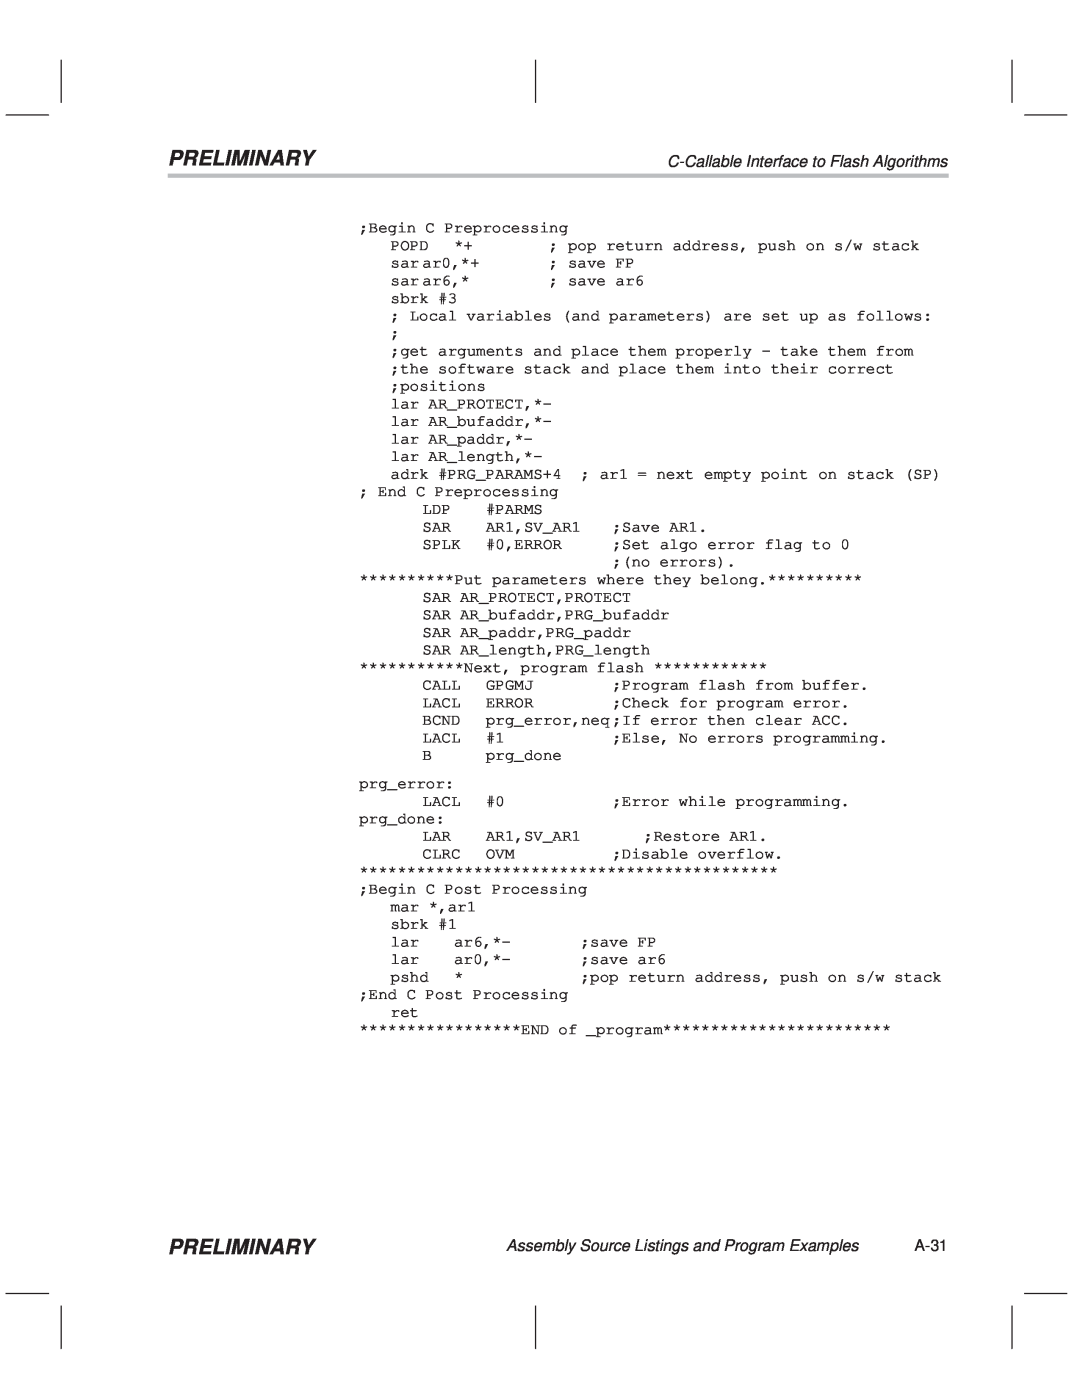 Texas Instruments TMS320F20x/F24x DSP manual Preliminary, C-Callable Interface to Flash Algorithms, A-31 